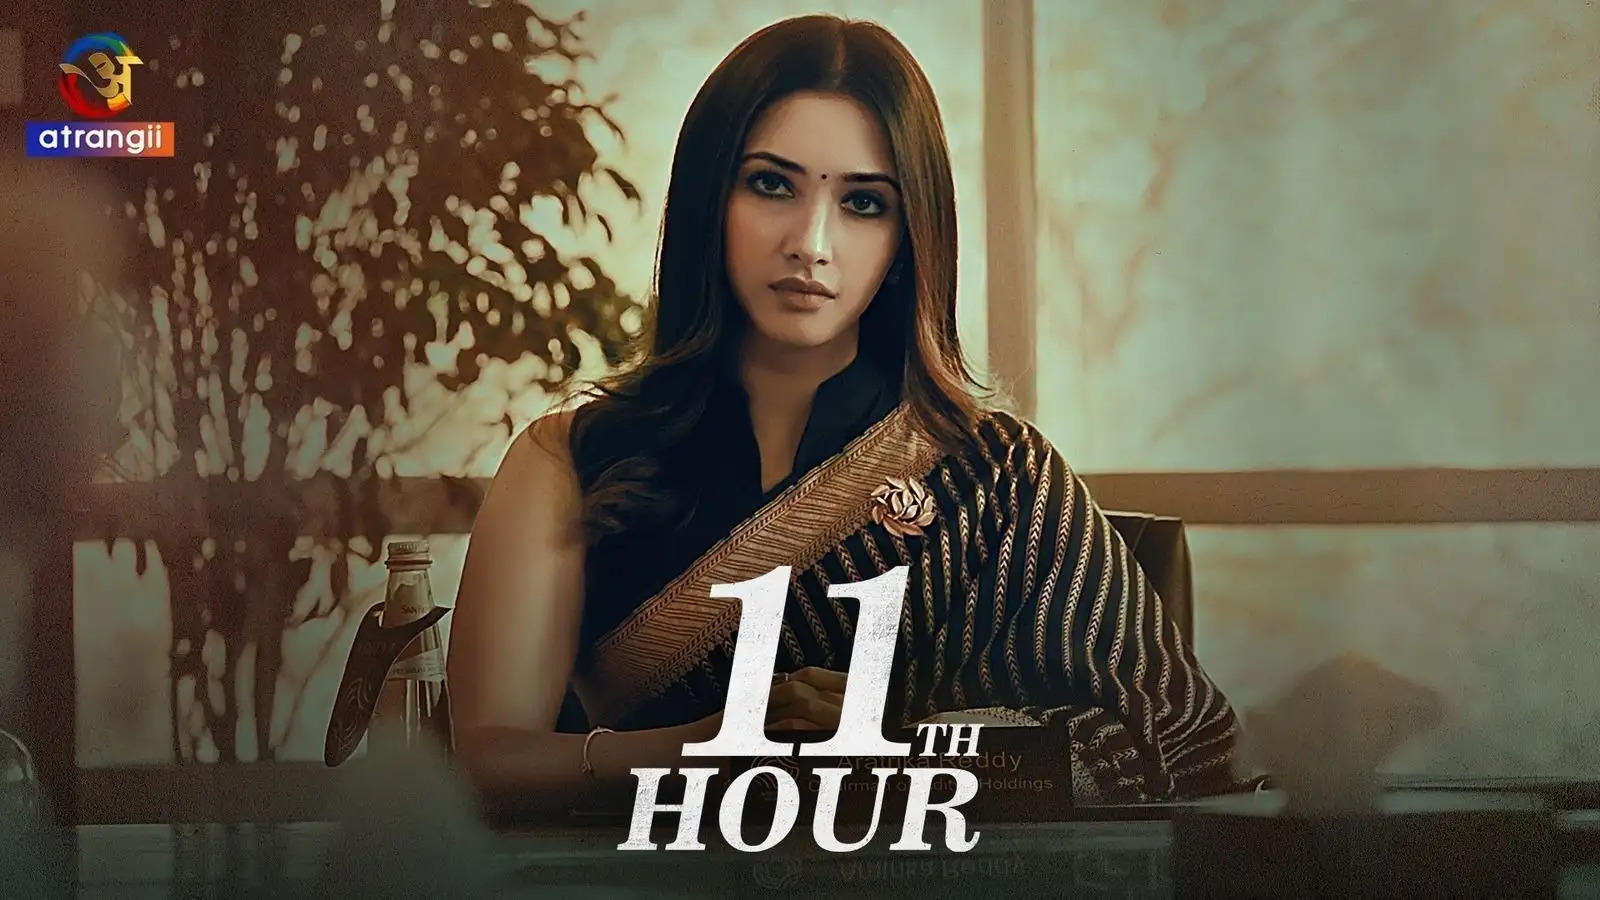 Actress Tamannaah Bhatia’s Much Awaited Thrilling Corporate Drama “11th Hour” Gets a Release Date on her Birthday